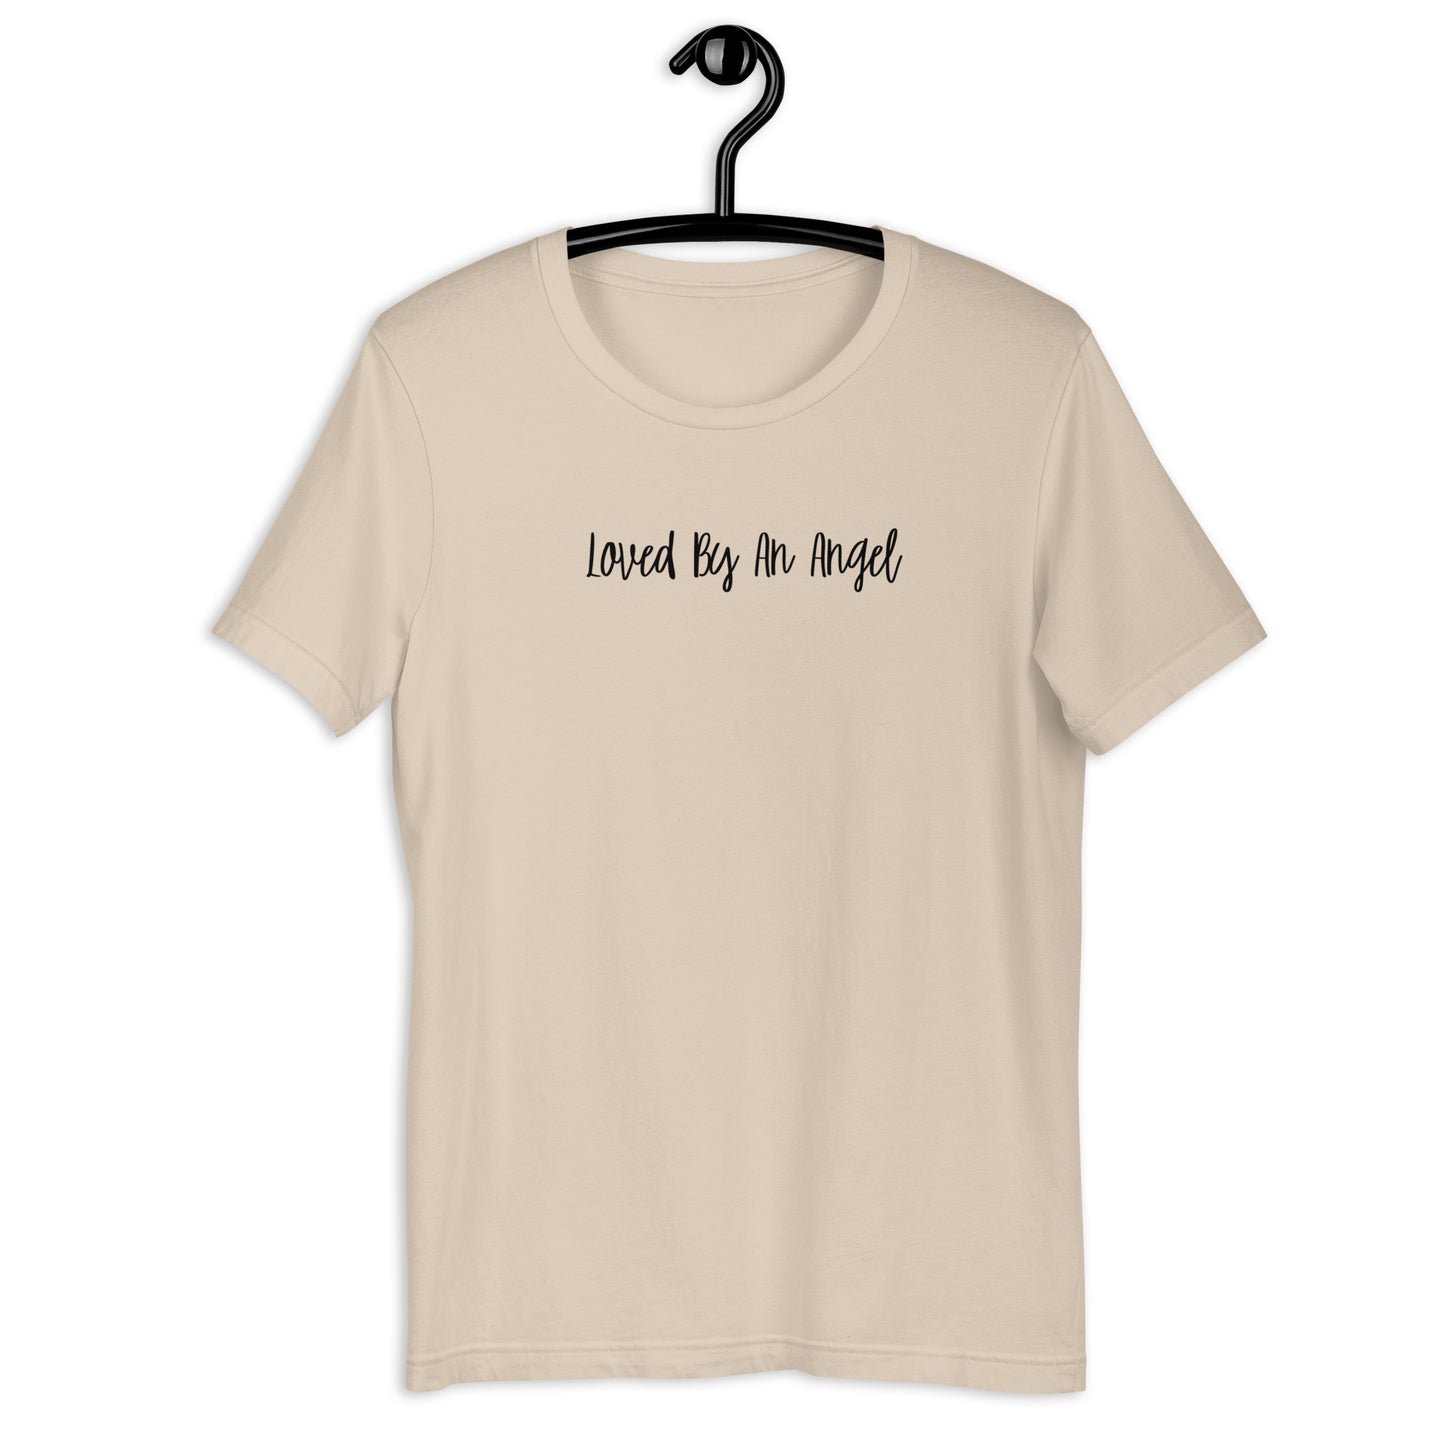 LOVED BY AN ANGEL TEE